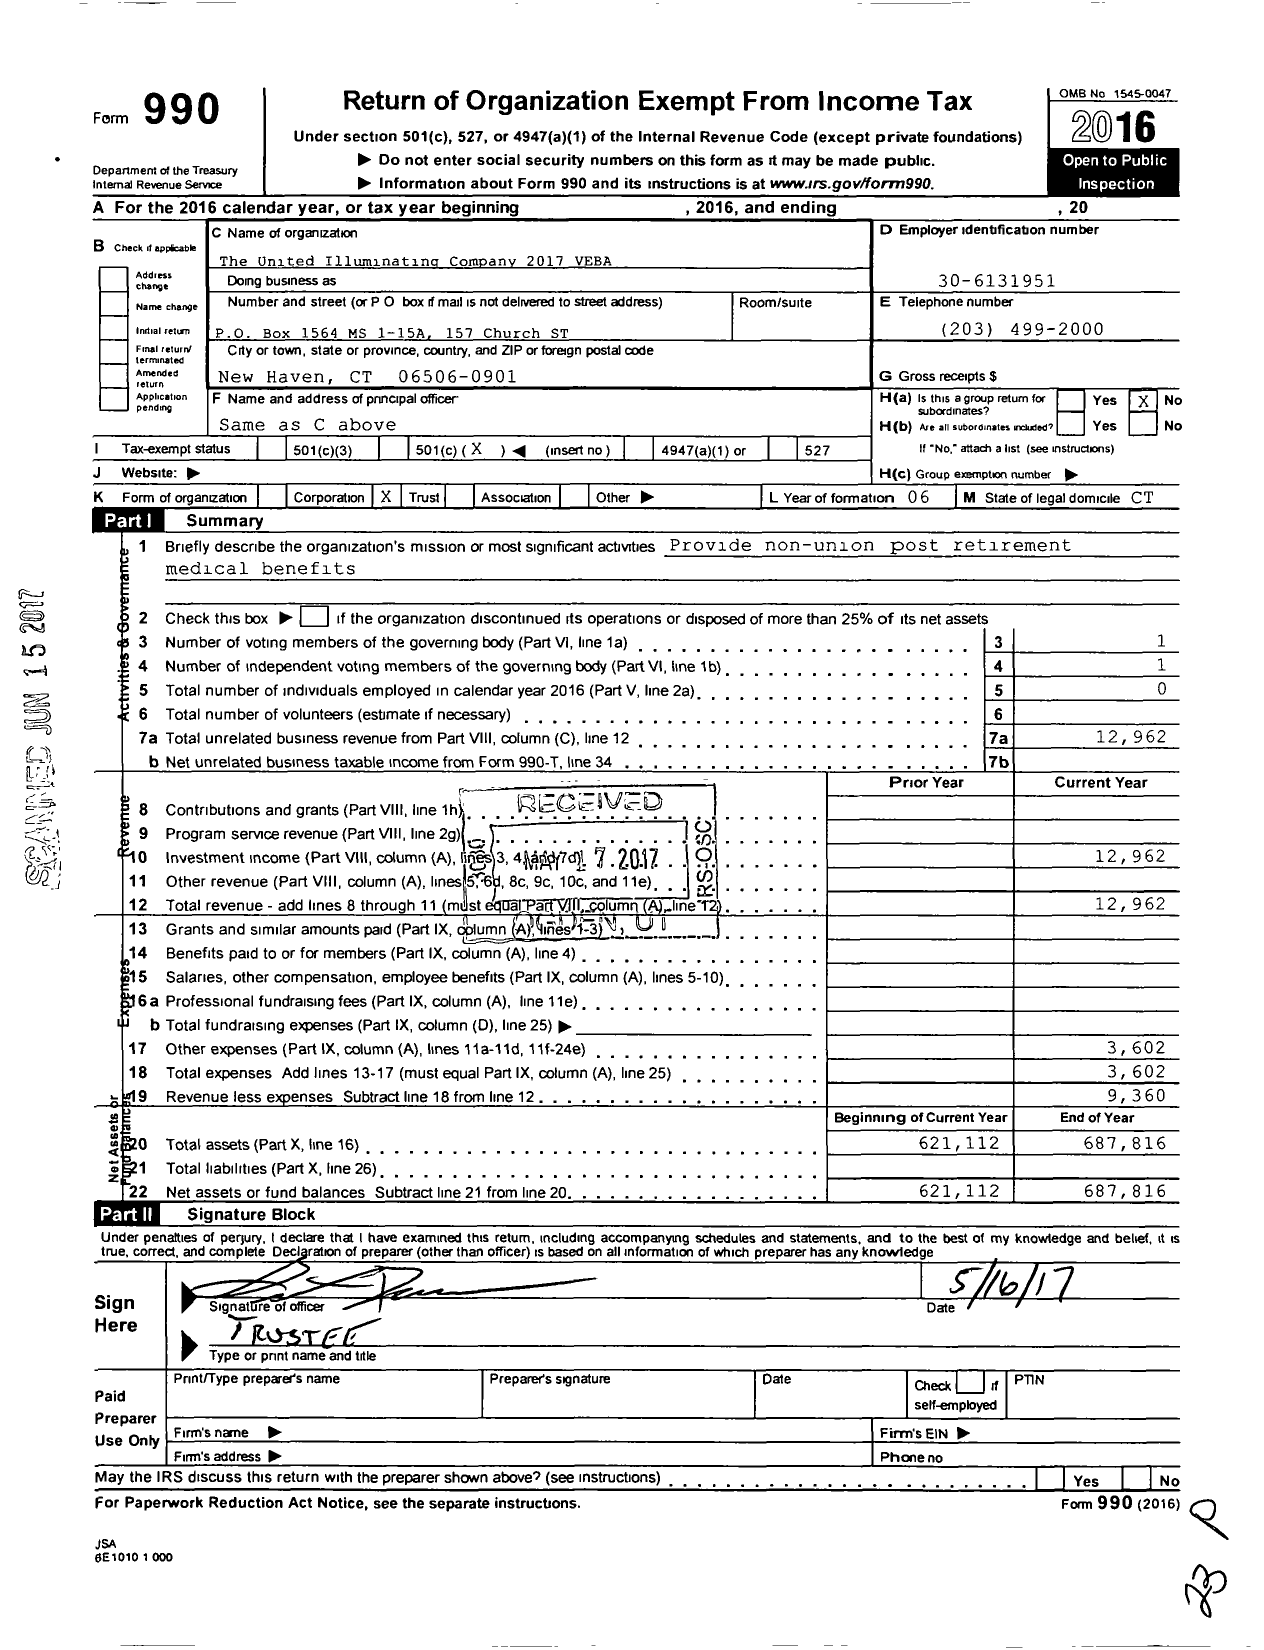 Image of first page of 2016 Form 990O for United Illuminating Company 2017 Veba